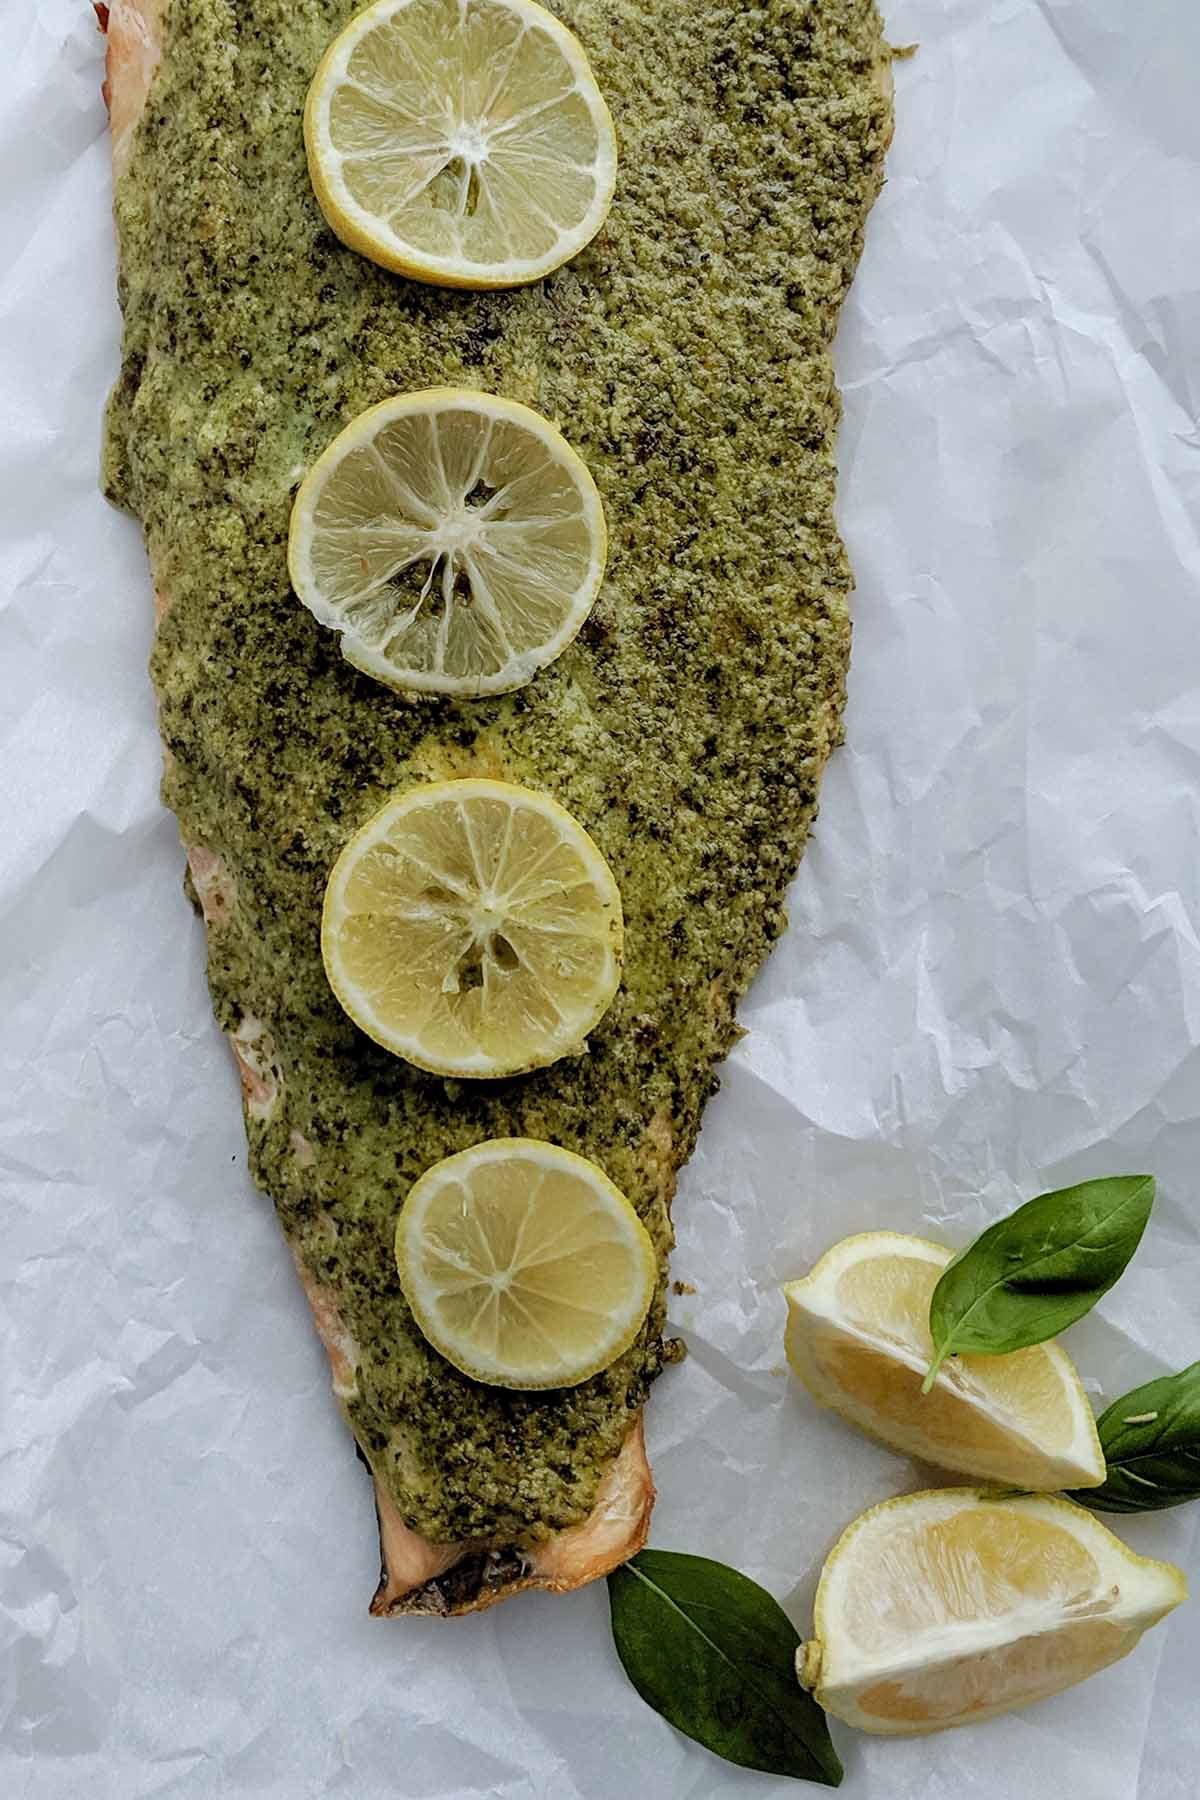 cooked crusted salmon topped with lemon slices.